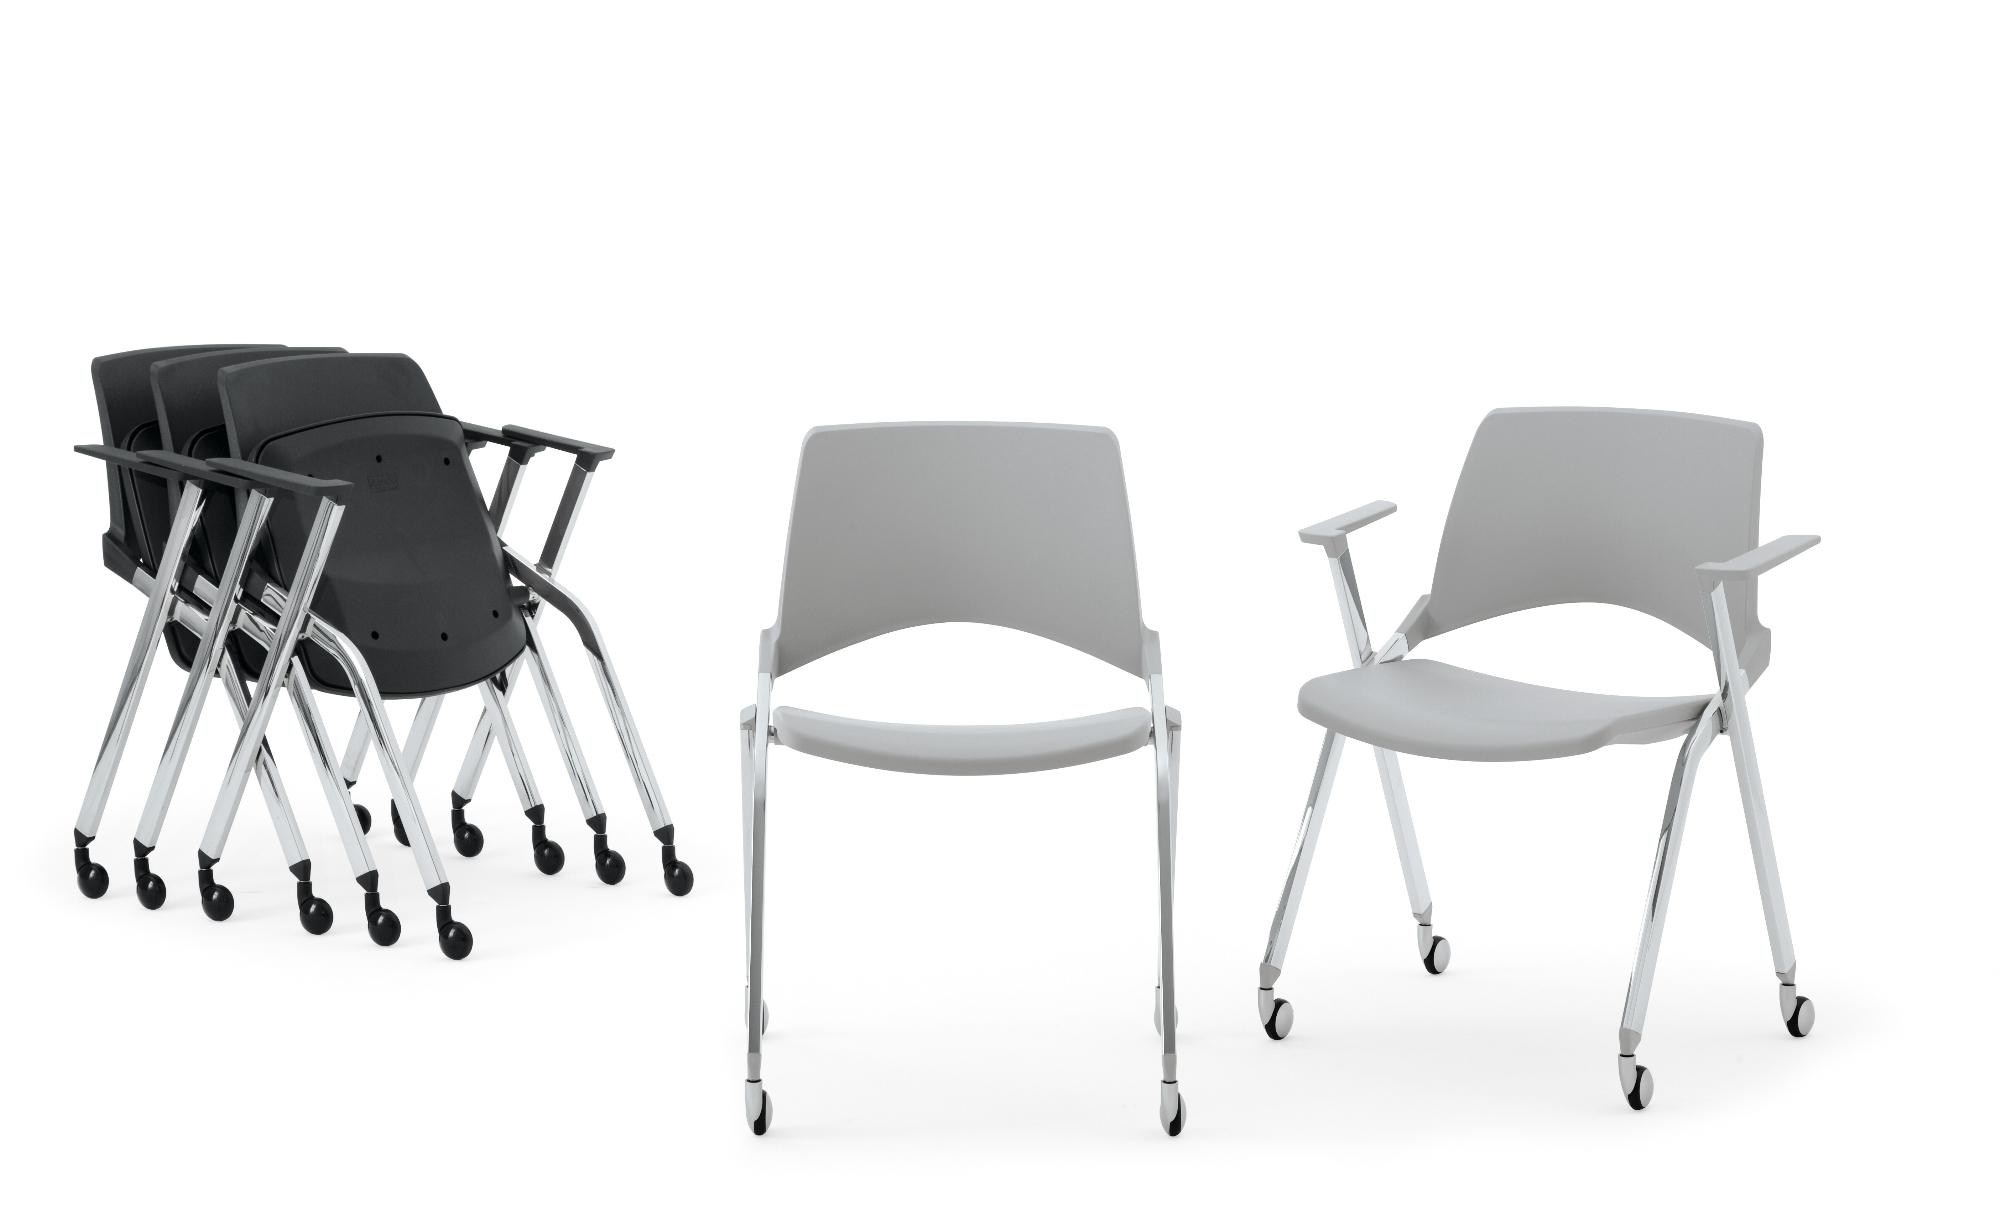 laKENDÒ PLASTIC CASTOR CHAIR - CASTOR CHAIRS - SEATING - Products